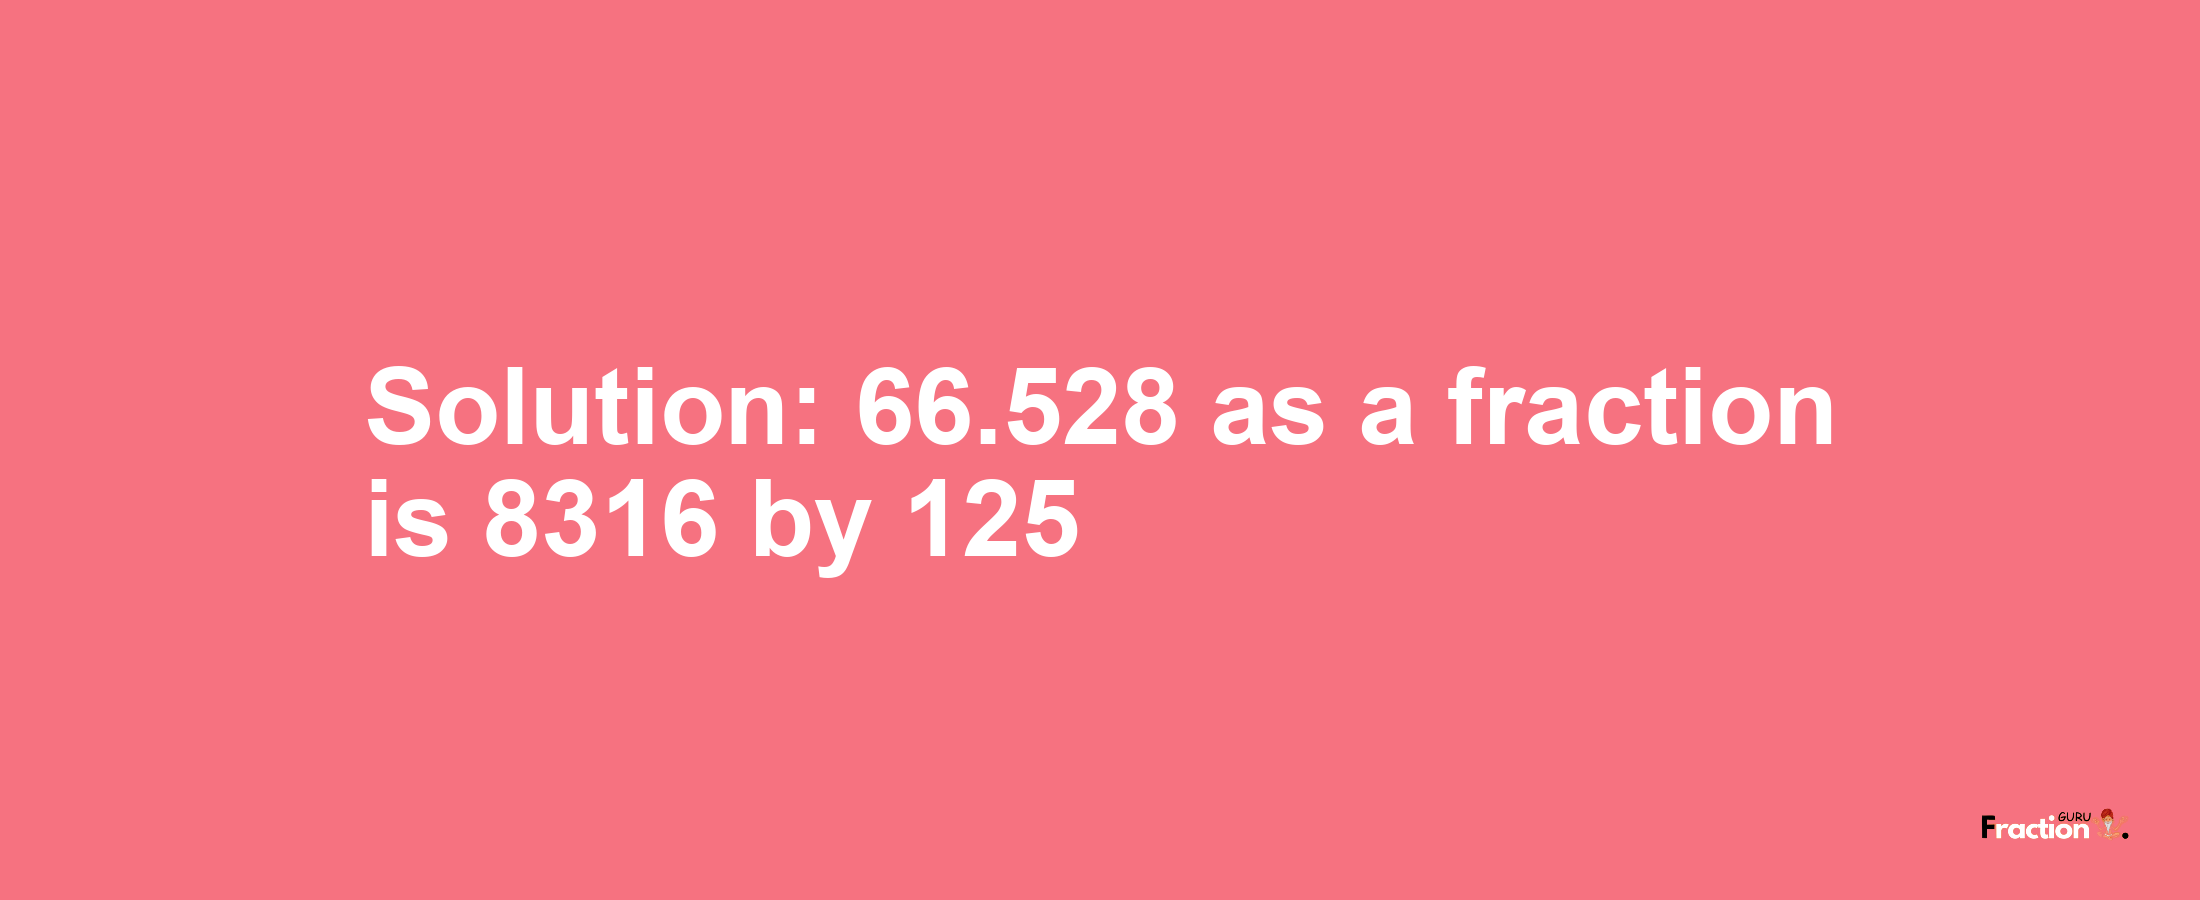 Solution:66.528 as a fraction is 8316/125